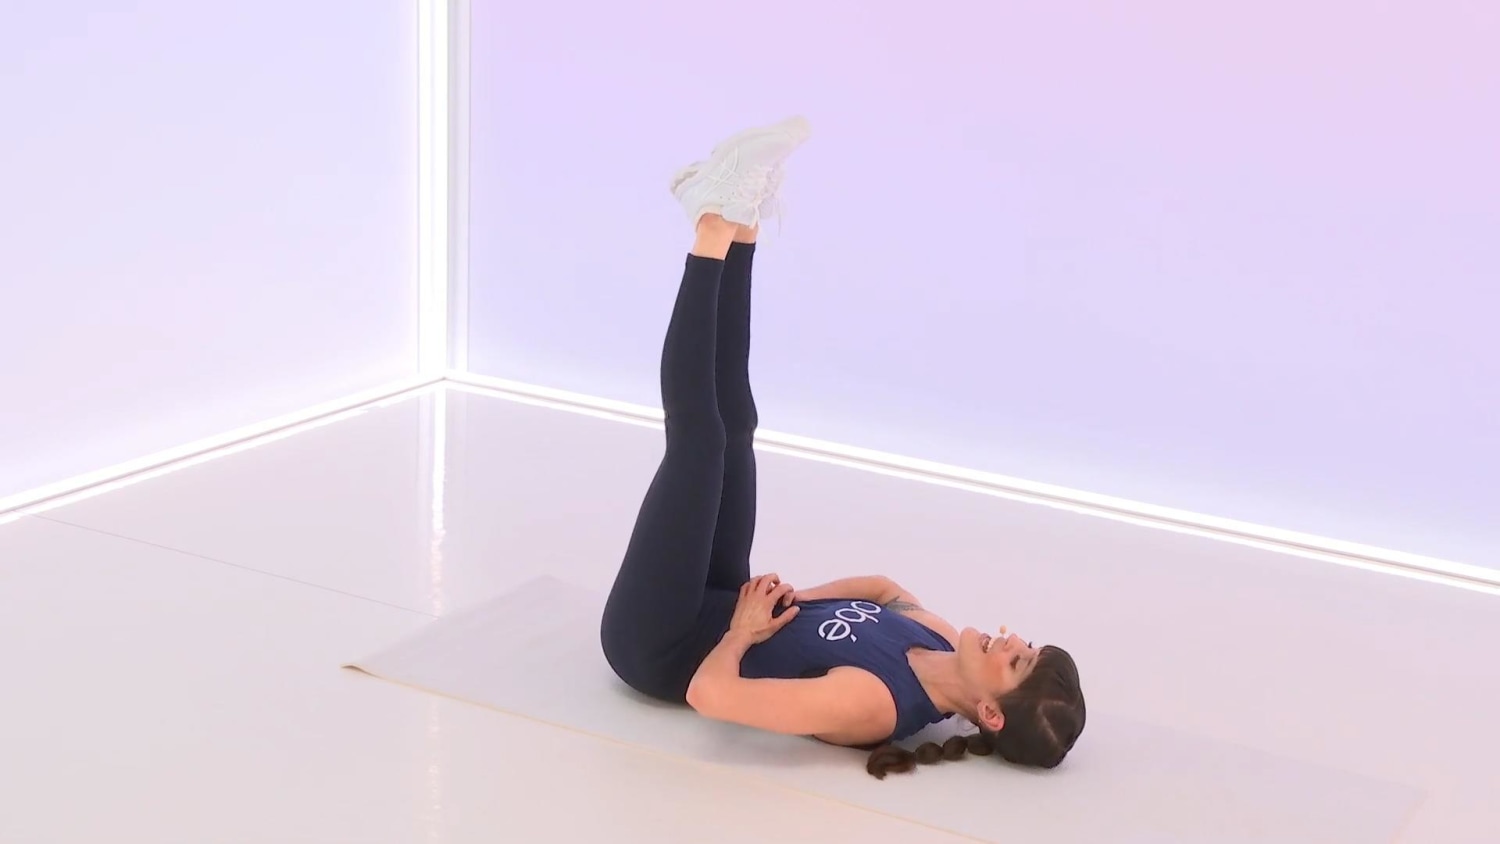 HOW TO FLATTEN YOUR STOMACH (5 Tummy Toning Exercises)